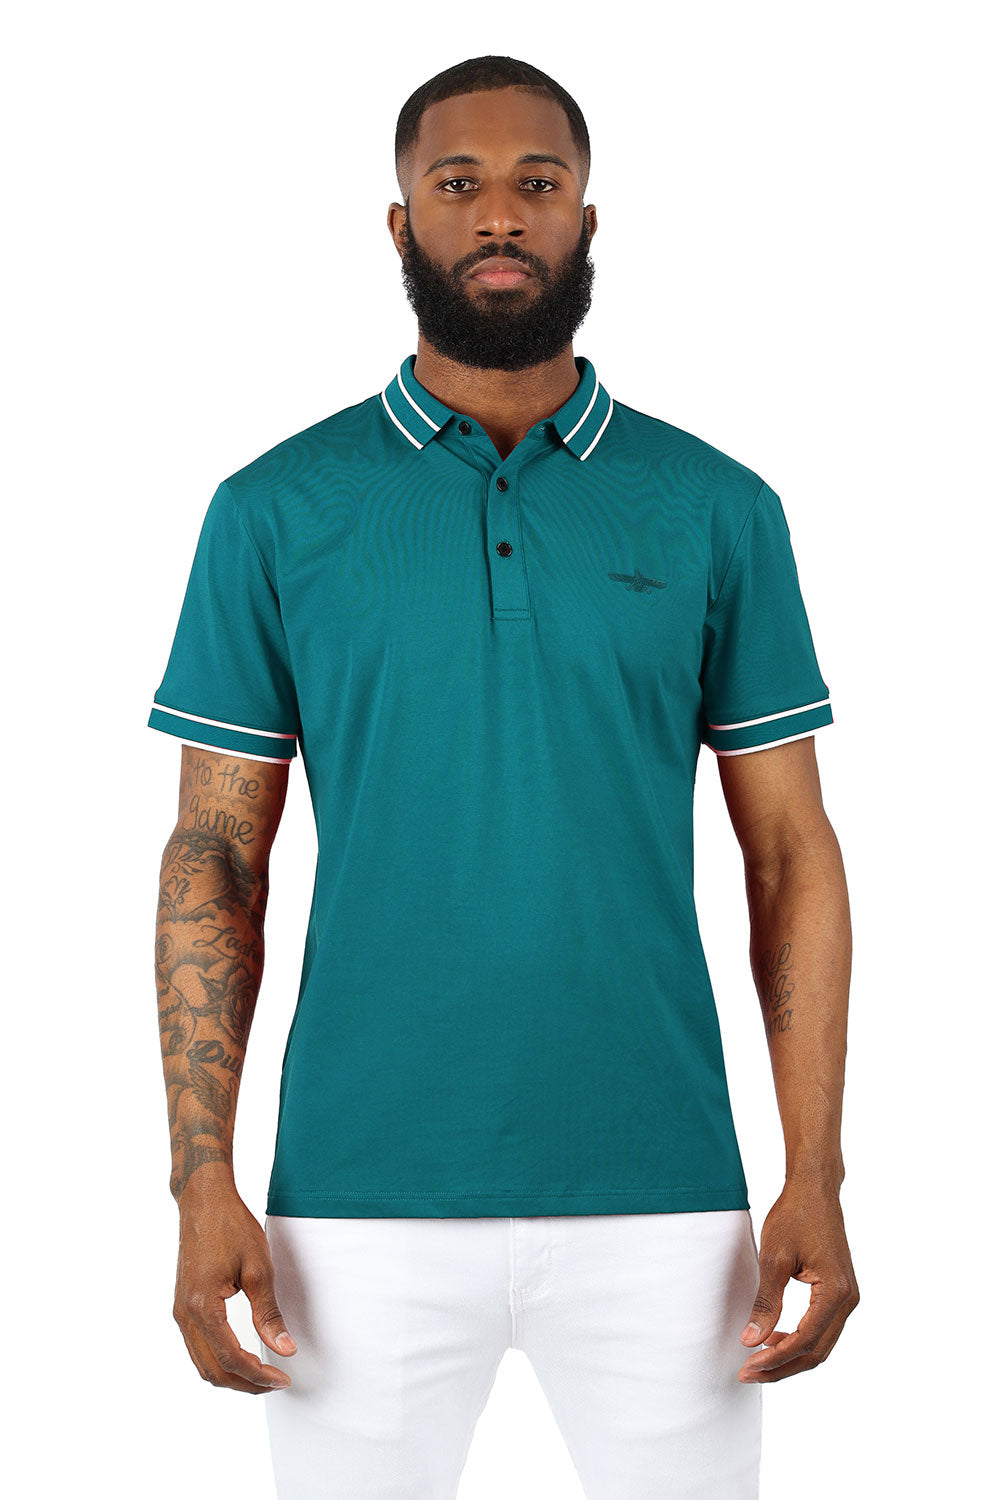 Barabas Men's Solid Color with Logo Polo Shirts 3PP832 Teal White